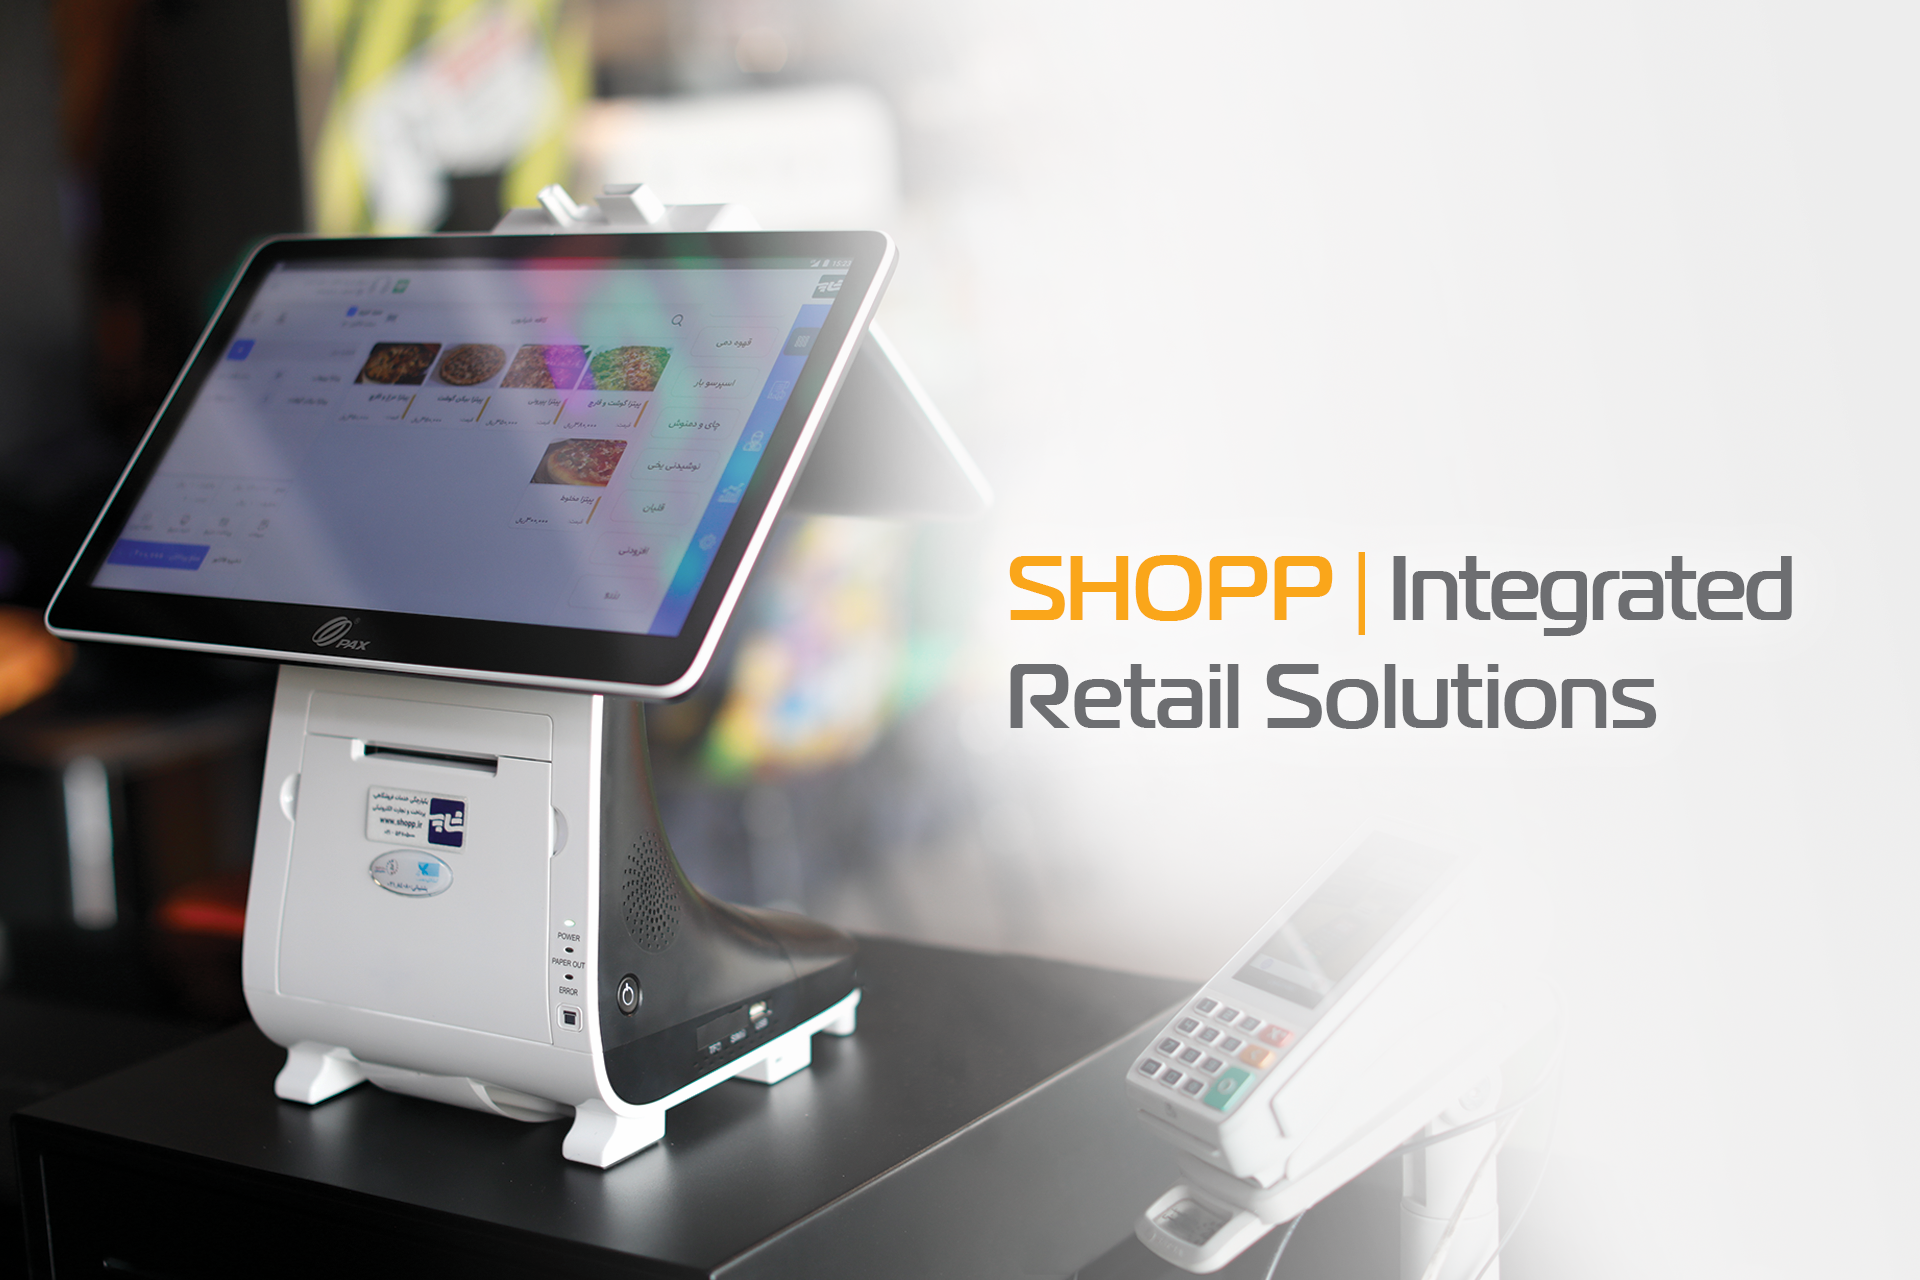 SHOPP | Integrated Retail Solutions